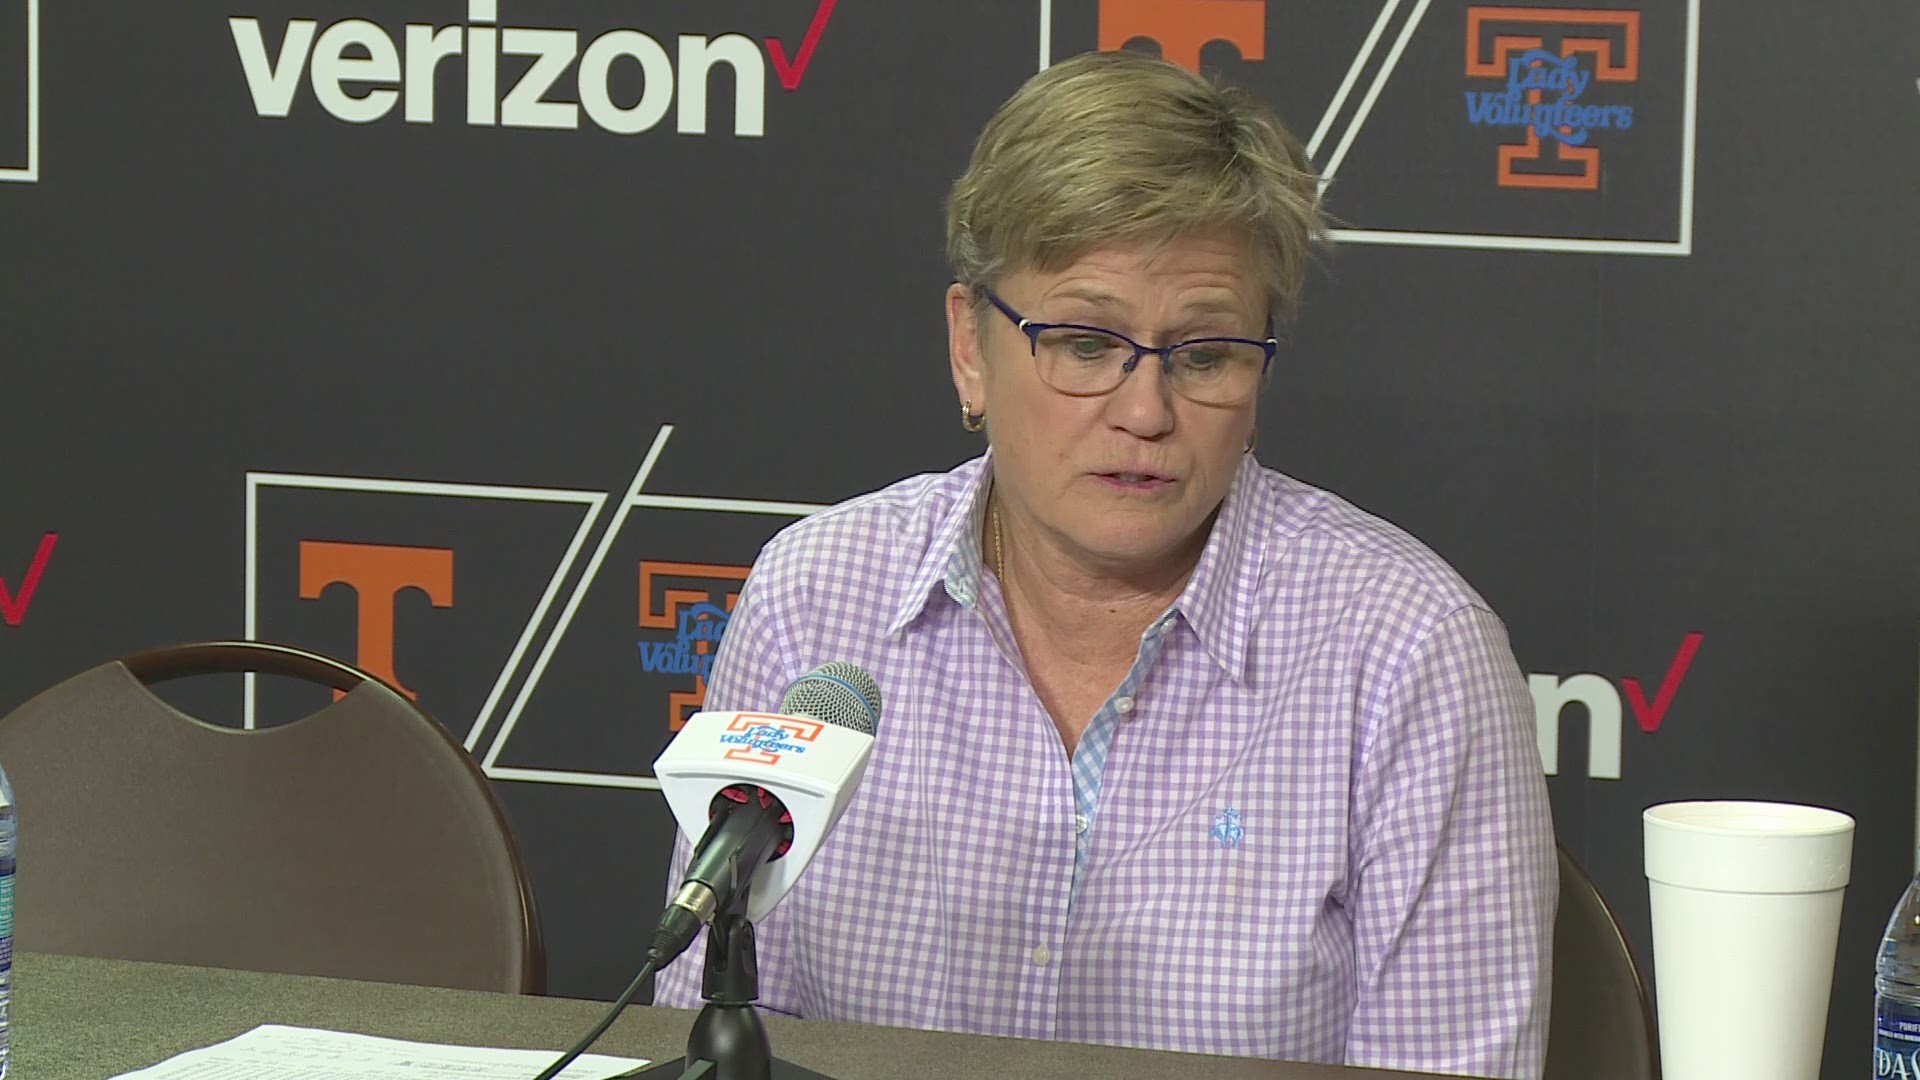 The Lady Vols have lost five straight games for the first time since 1970. After an 80-79 loss to Arkansas on We Back Pat night, head coach Holly Warlick told her team something she learned from Pat Summitt.